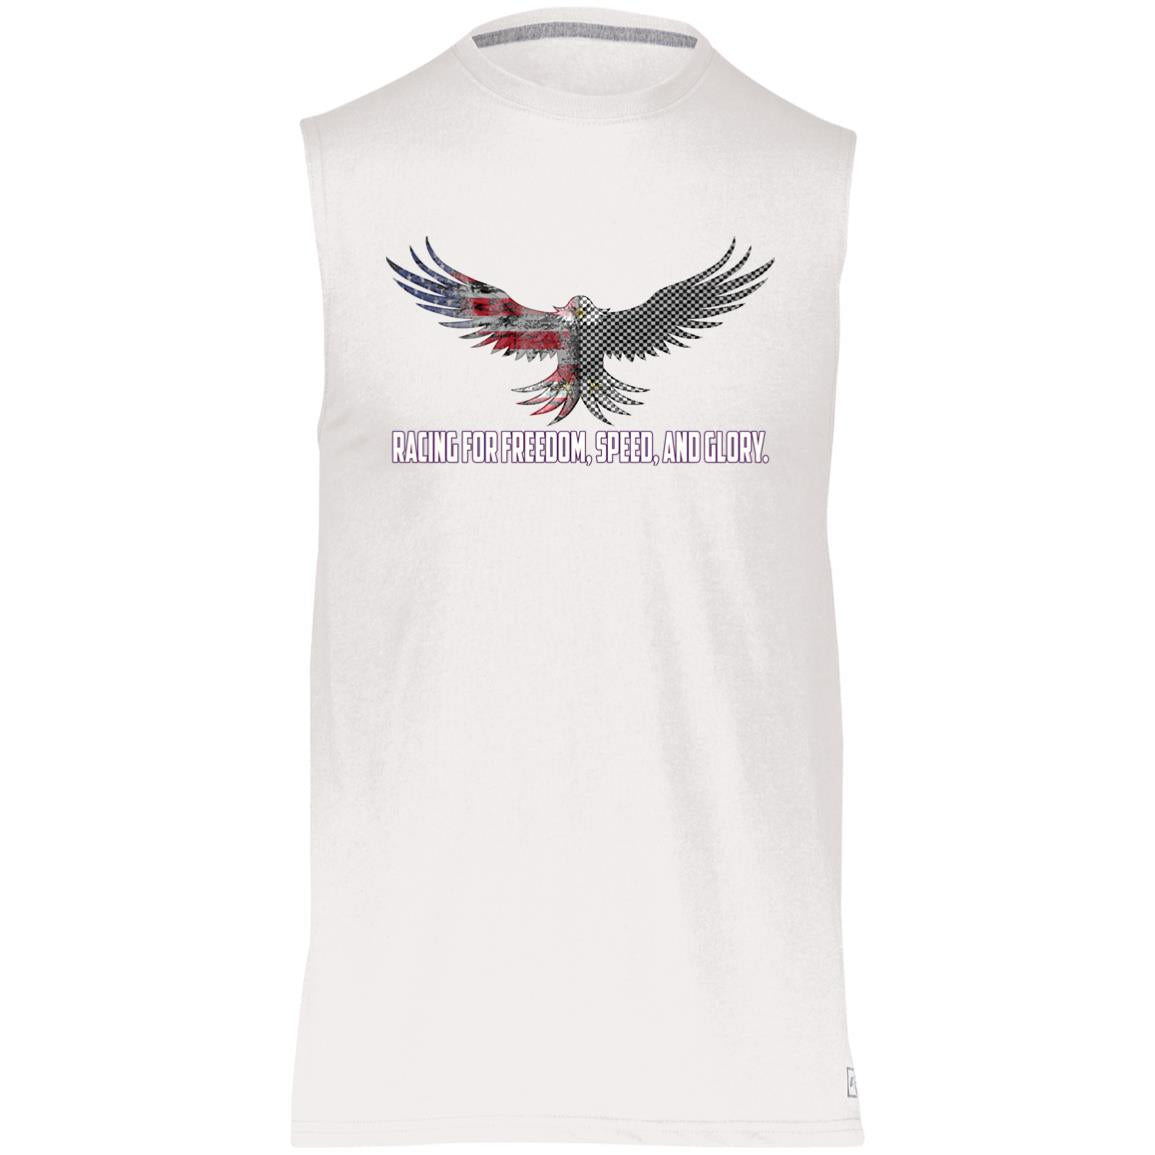 Racing For Freedom, Speed, And Glory Essential Dri-Power Sleeveless Muscle Tee